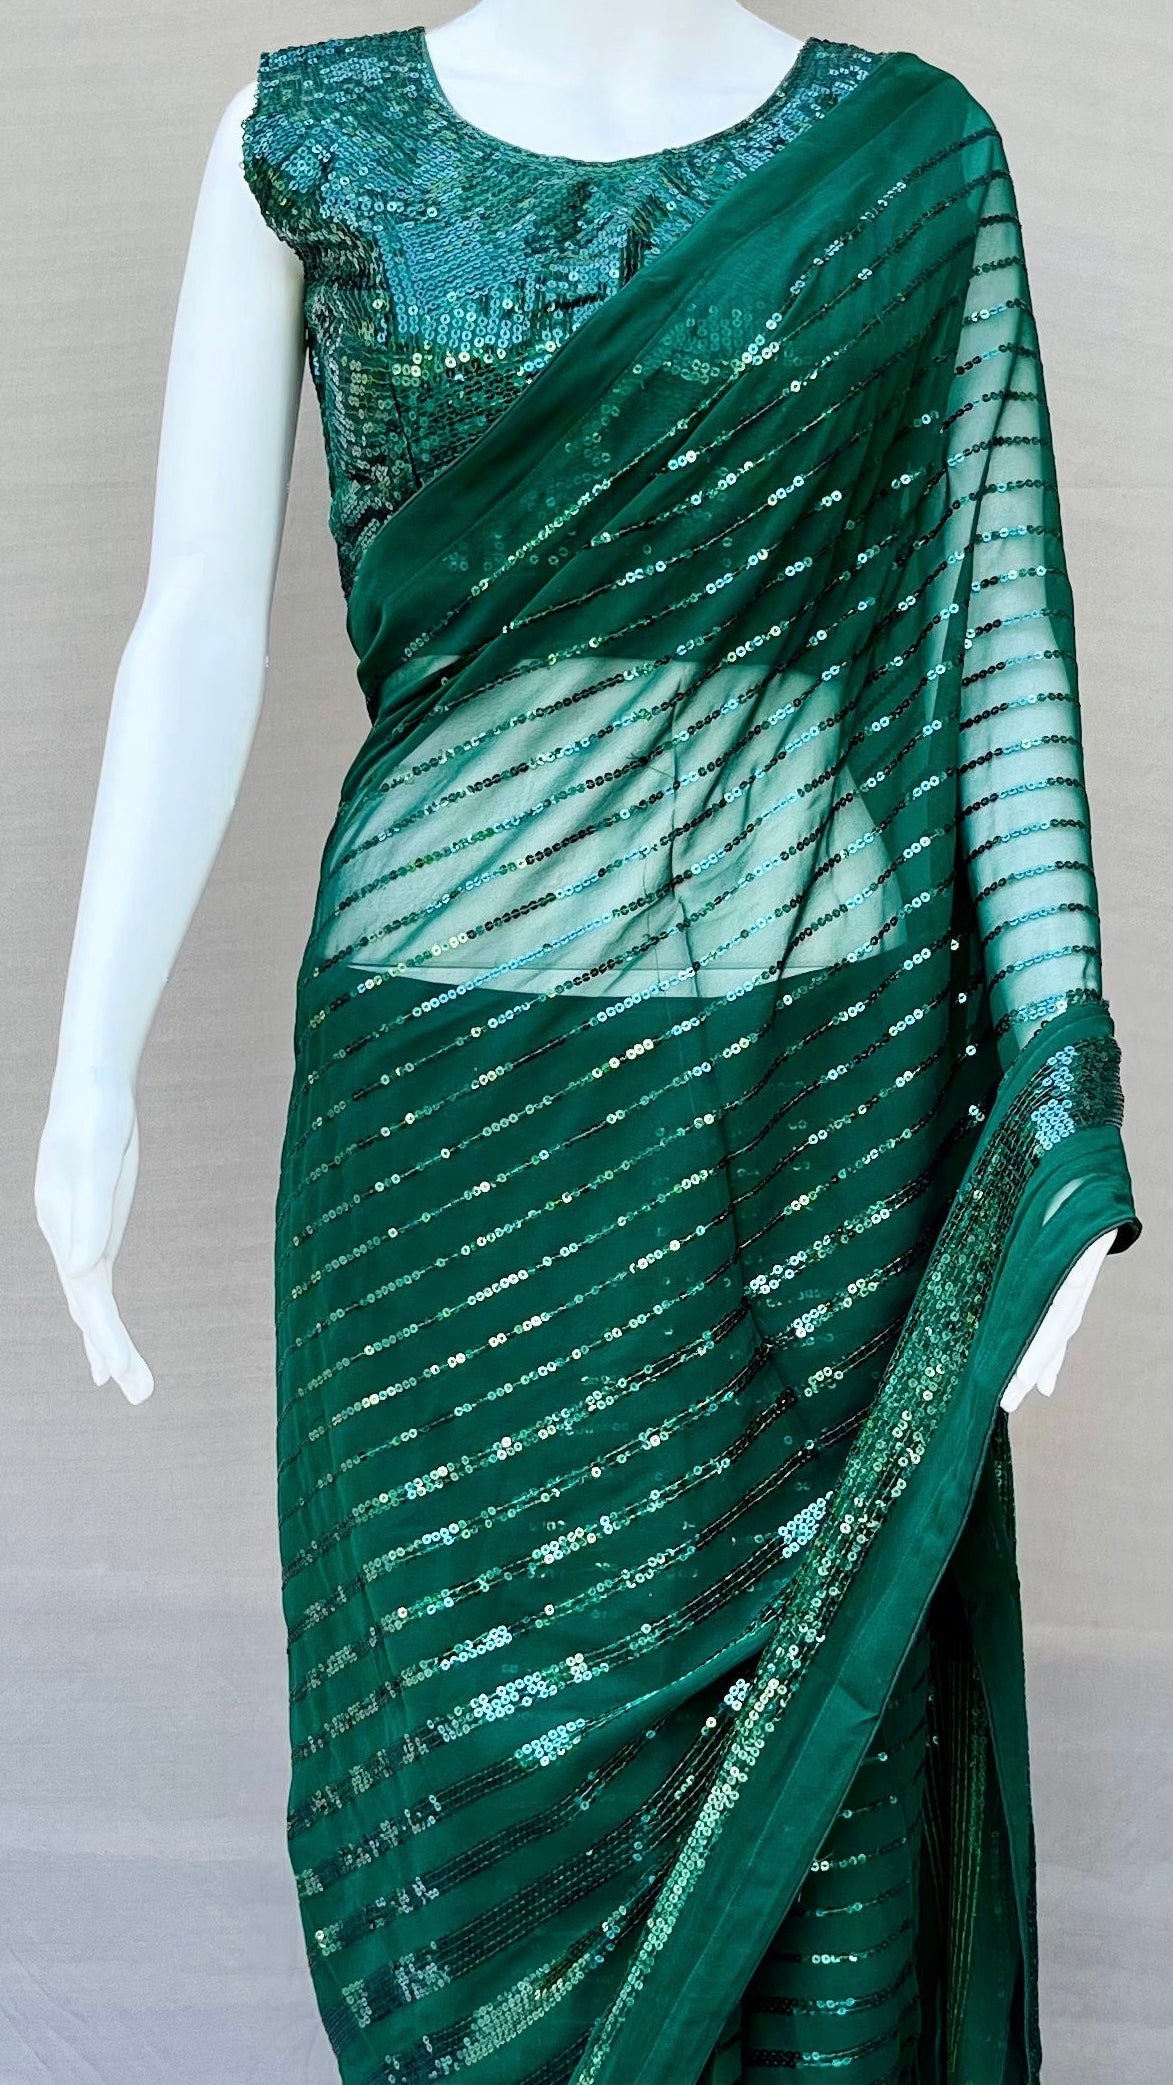 Enchanting Green Sequins Georgette Saree with Ready-to-Wear Blouse - Glamorous Style for the Modern Woman